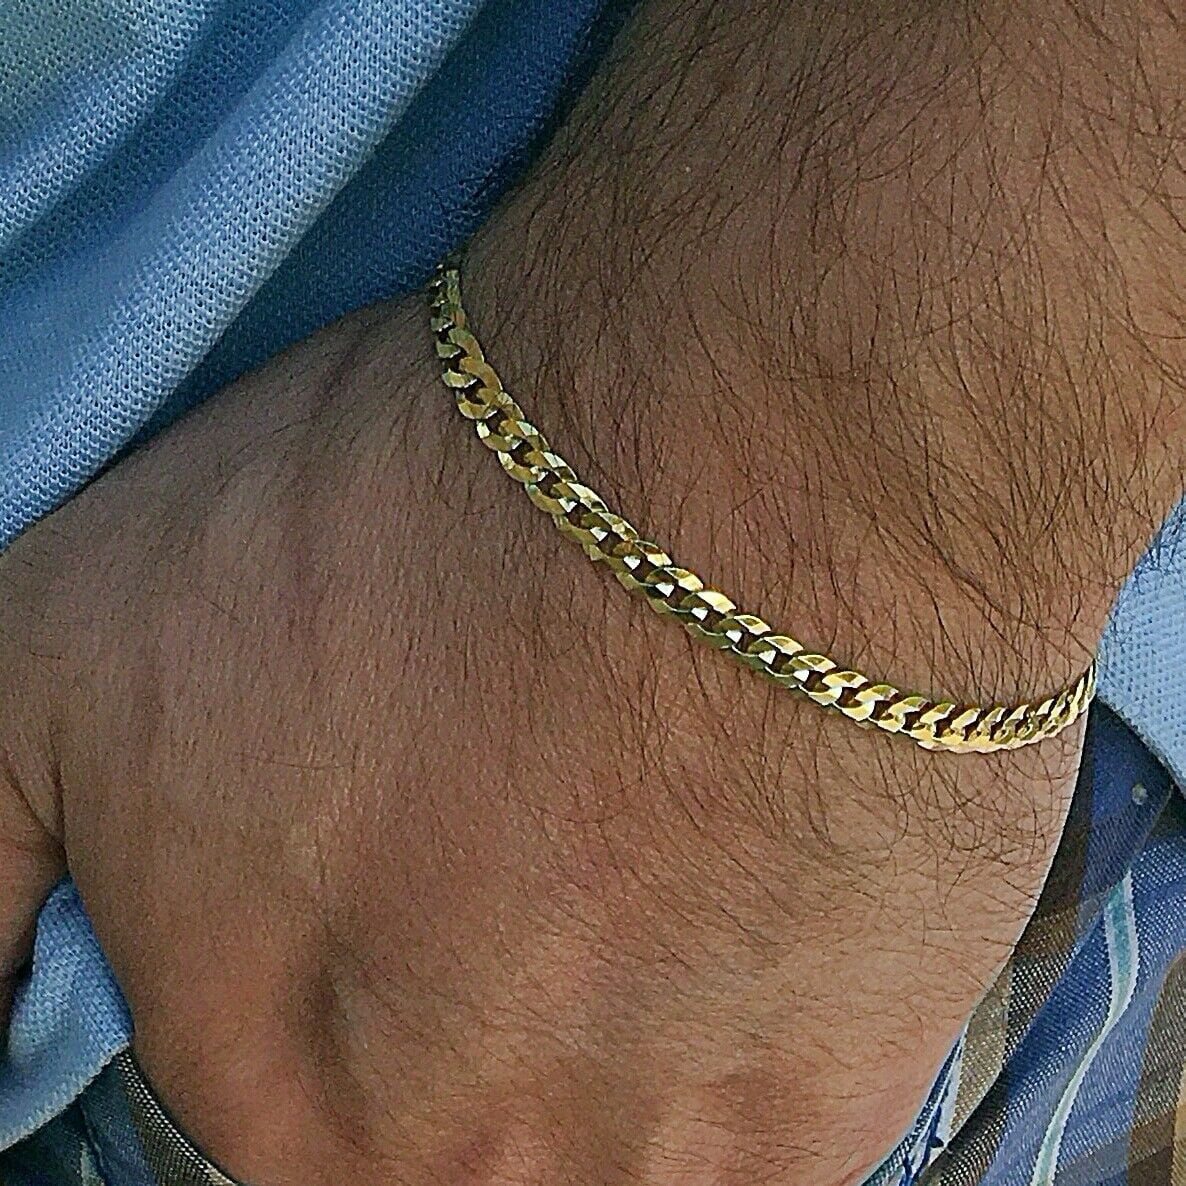 10mm Mens 18K Gold Plated Sterling Silver Heavy Cuban Chain Link Bracelet 9 inch